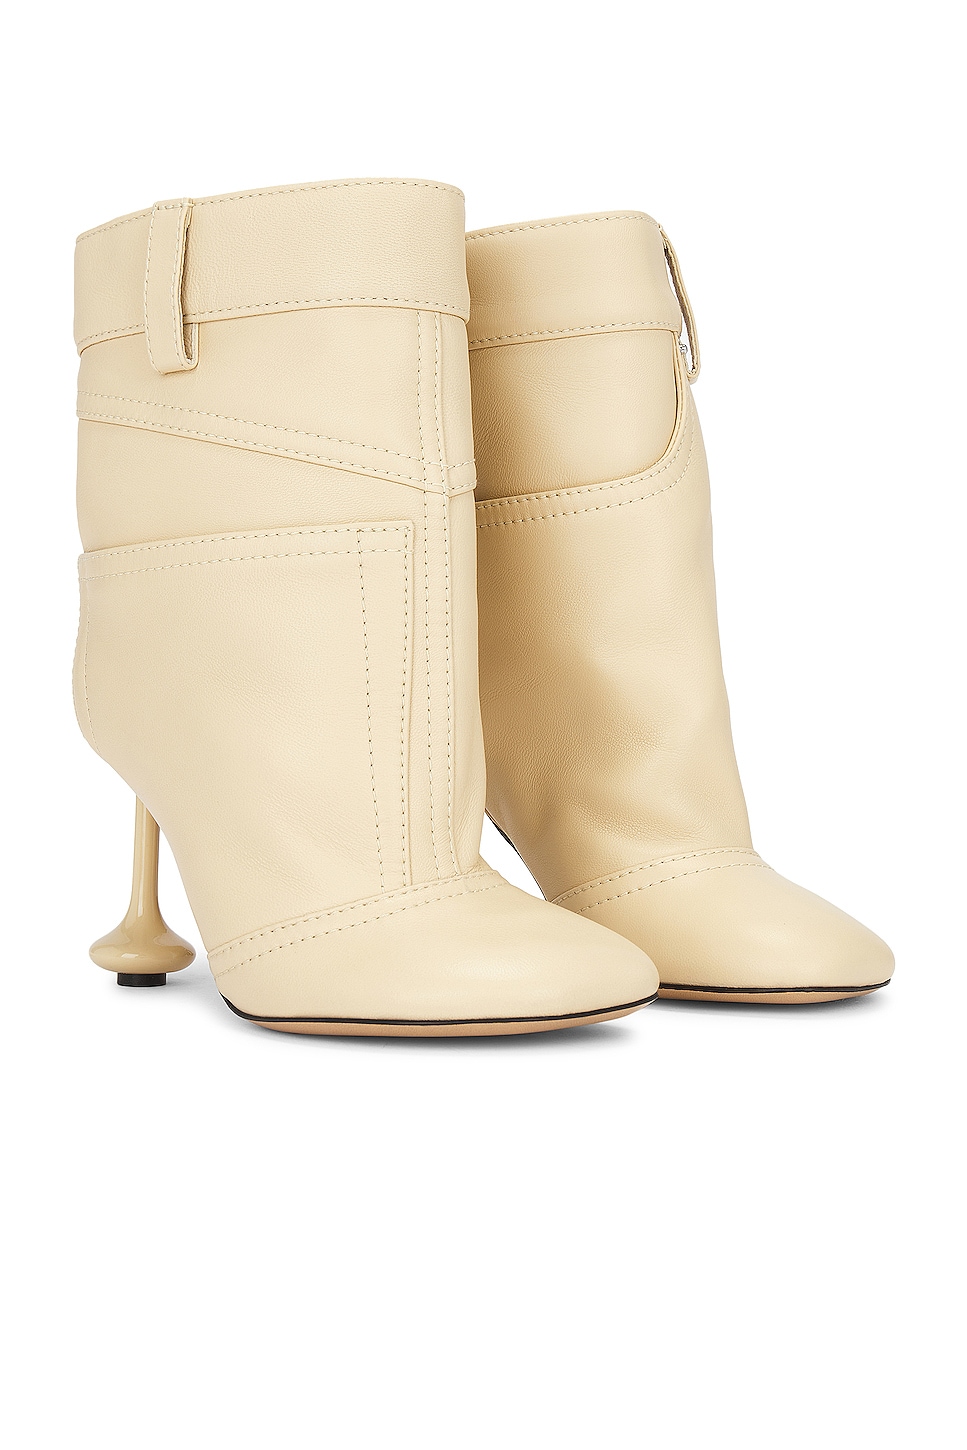 Image 1 of Loewe Toy Ankle Boot in Oat Milk